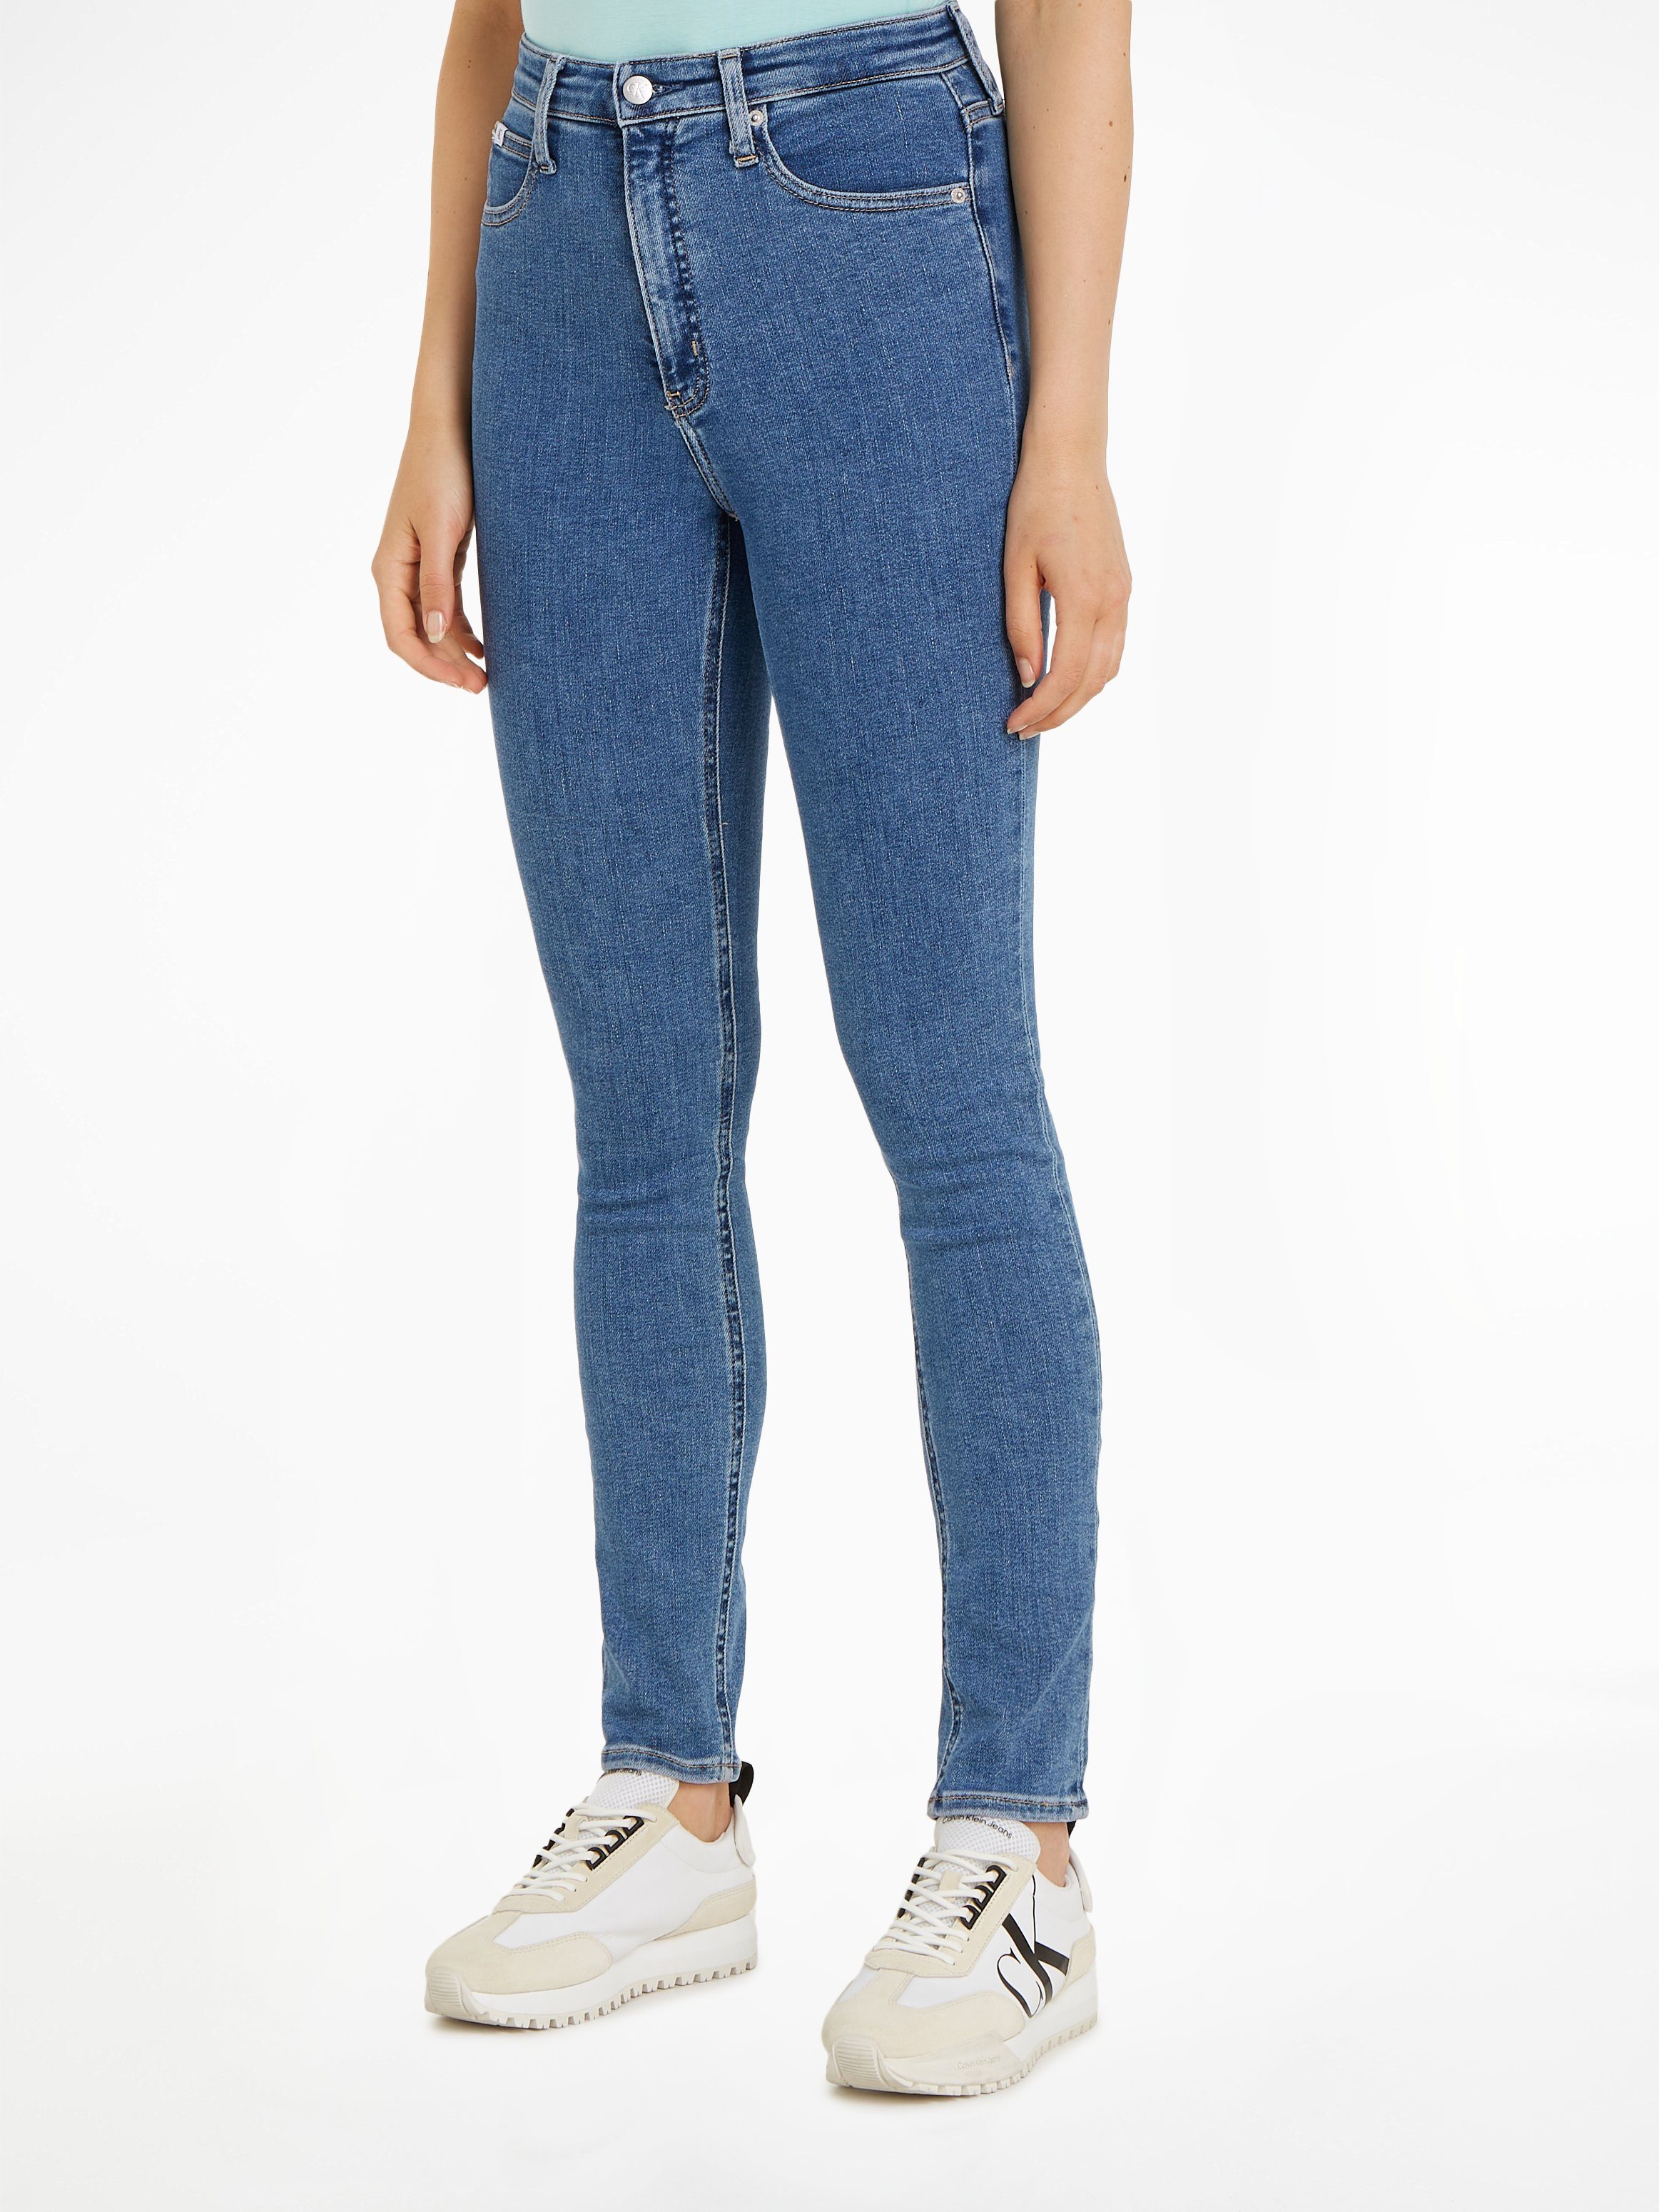 Calvin Klein Jeans Skinny-fit-Jeans HIGH RISE SKINNY mit Markenlabel